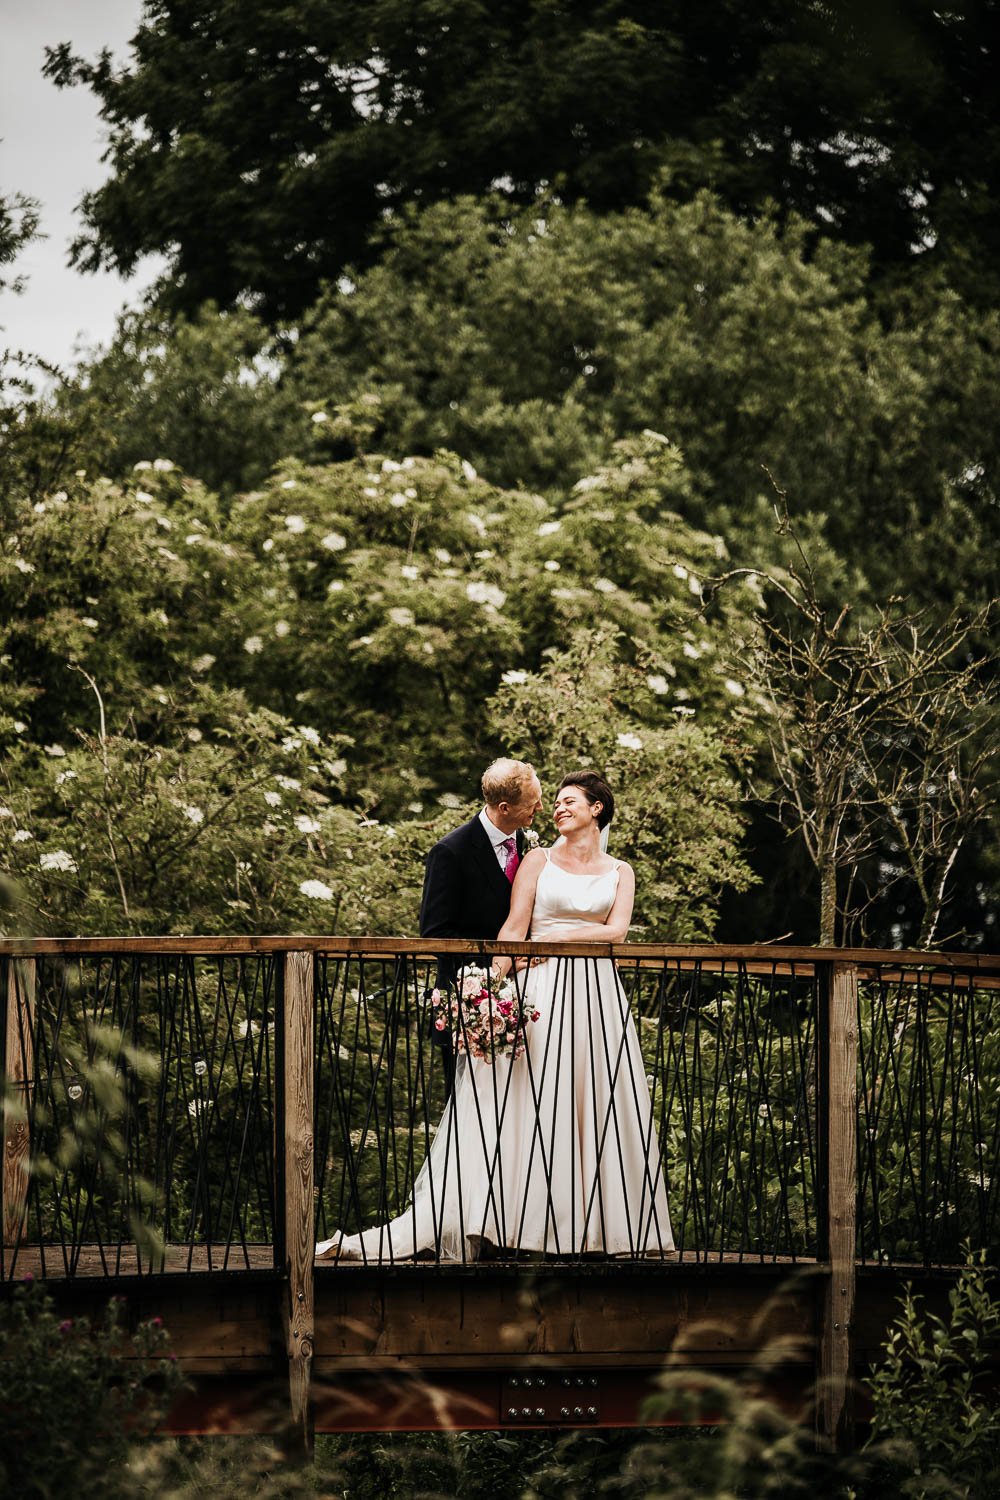 Bride and groom on bridge holding each other close for a special moment at Hardwick Moat Weddings